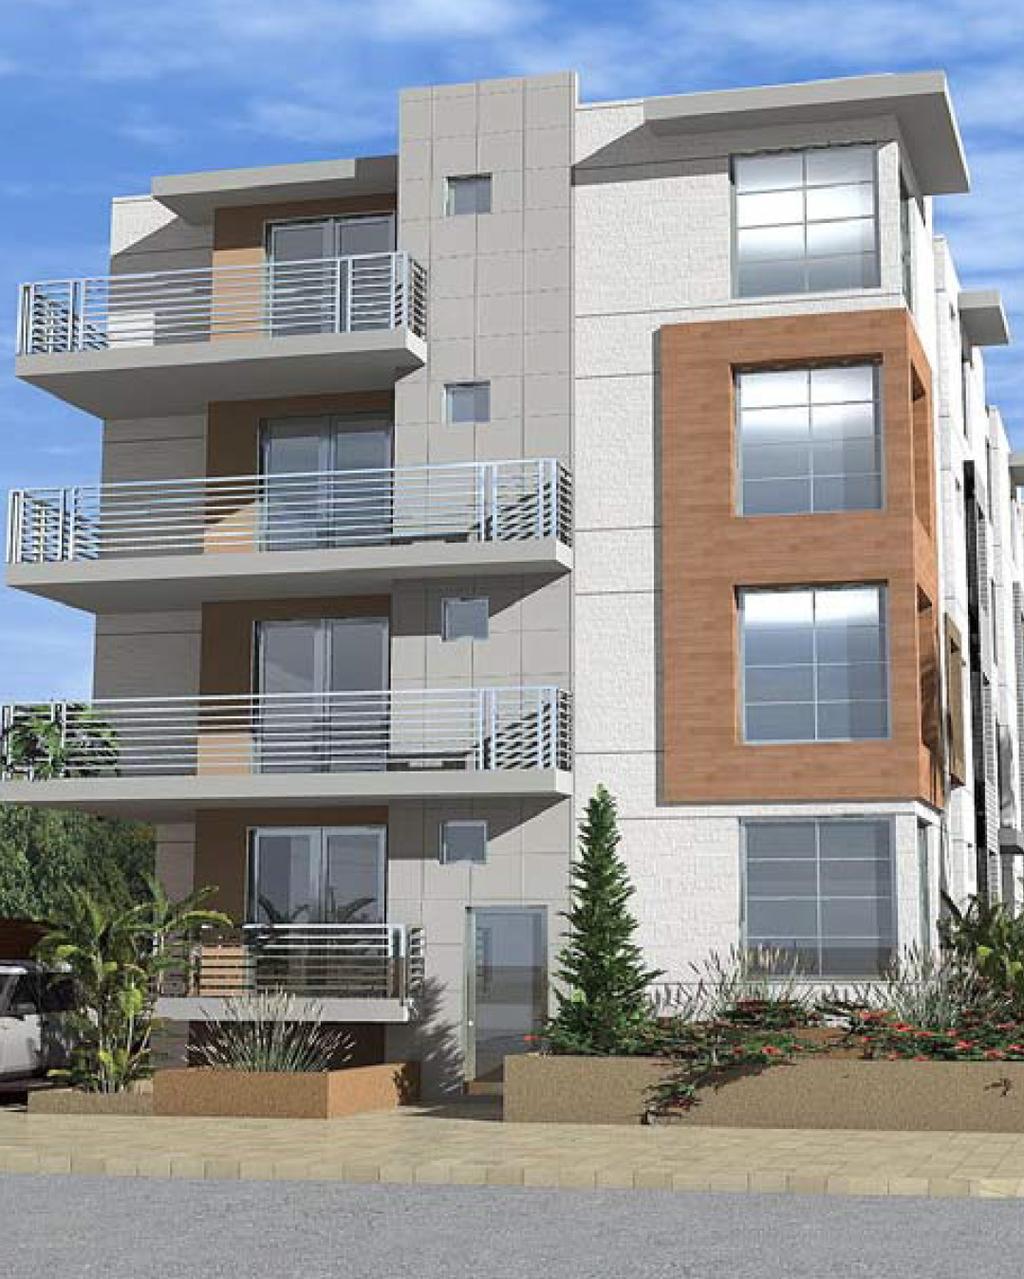 PROPERTY DESCRIPTION BRC Advisors and Brookfield Partners are pleased to present for sale 1200-1202 N. Gordon Street, a 8 unit development site in the heart of Hollywood.